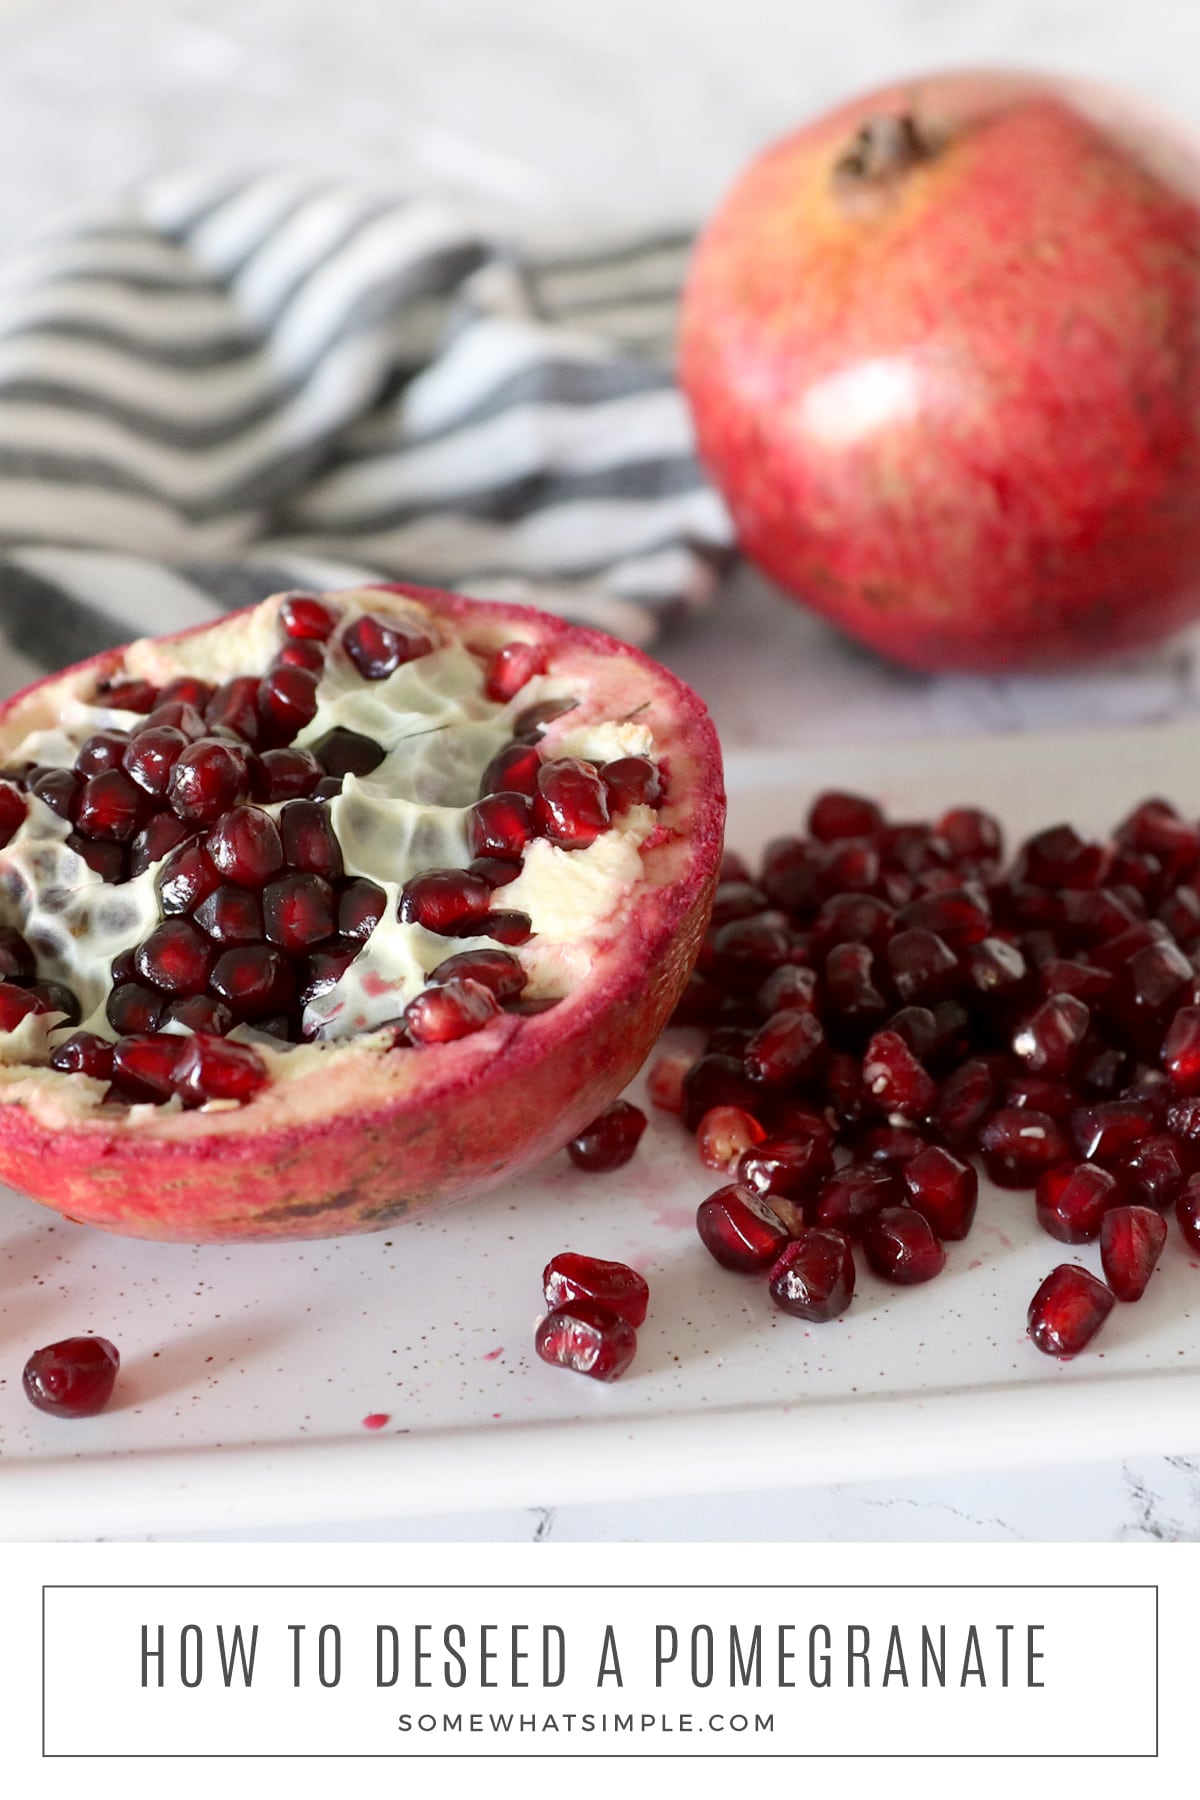 Pomegranates are delicious and juicy, but they can often be messy and hard to open. Until now! Here is fantastic kitchen hack that will show you how to cut open a pomegranate easily and without a mess! #howtoopenapomegranate #howtocutopenapomegranate #cuttingapomegranate #easywaytocutpomegranate #pomegranatehack via @somewhatsimple